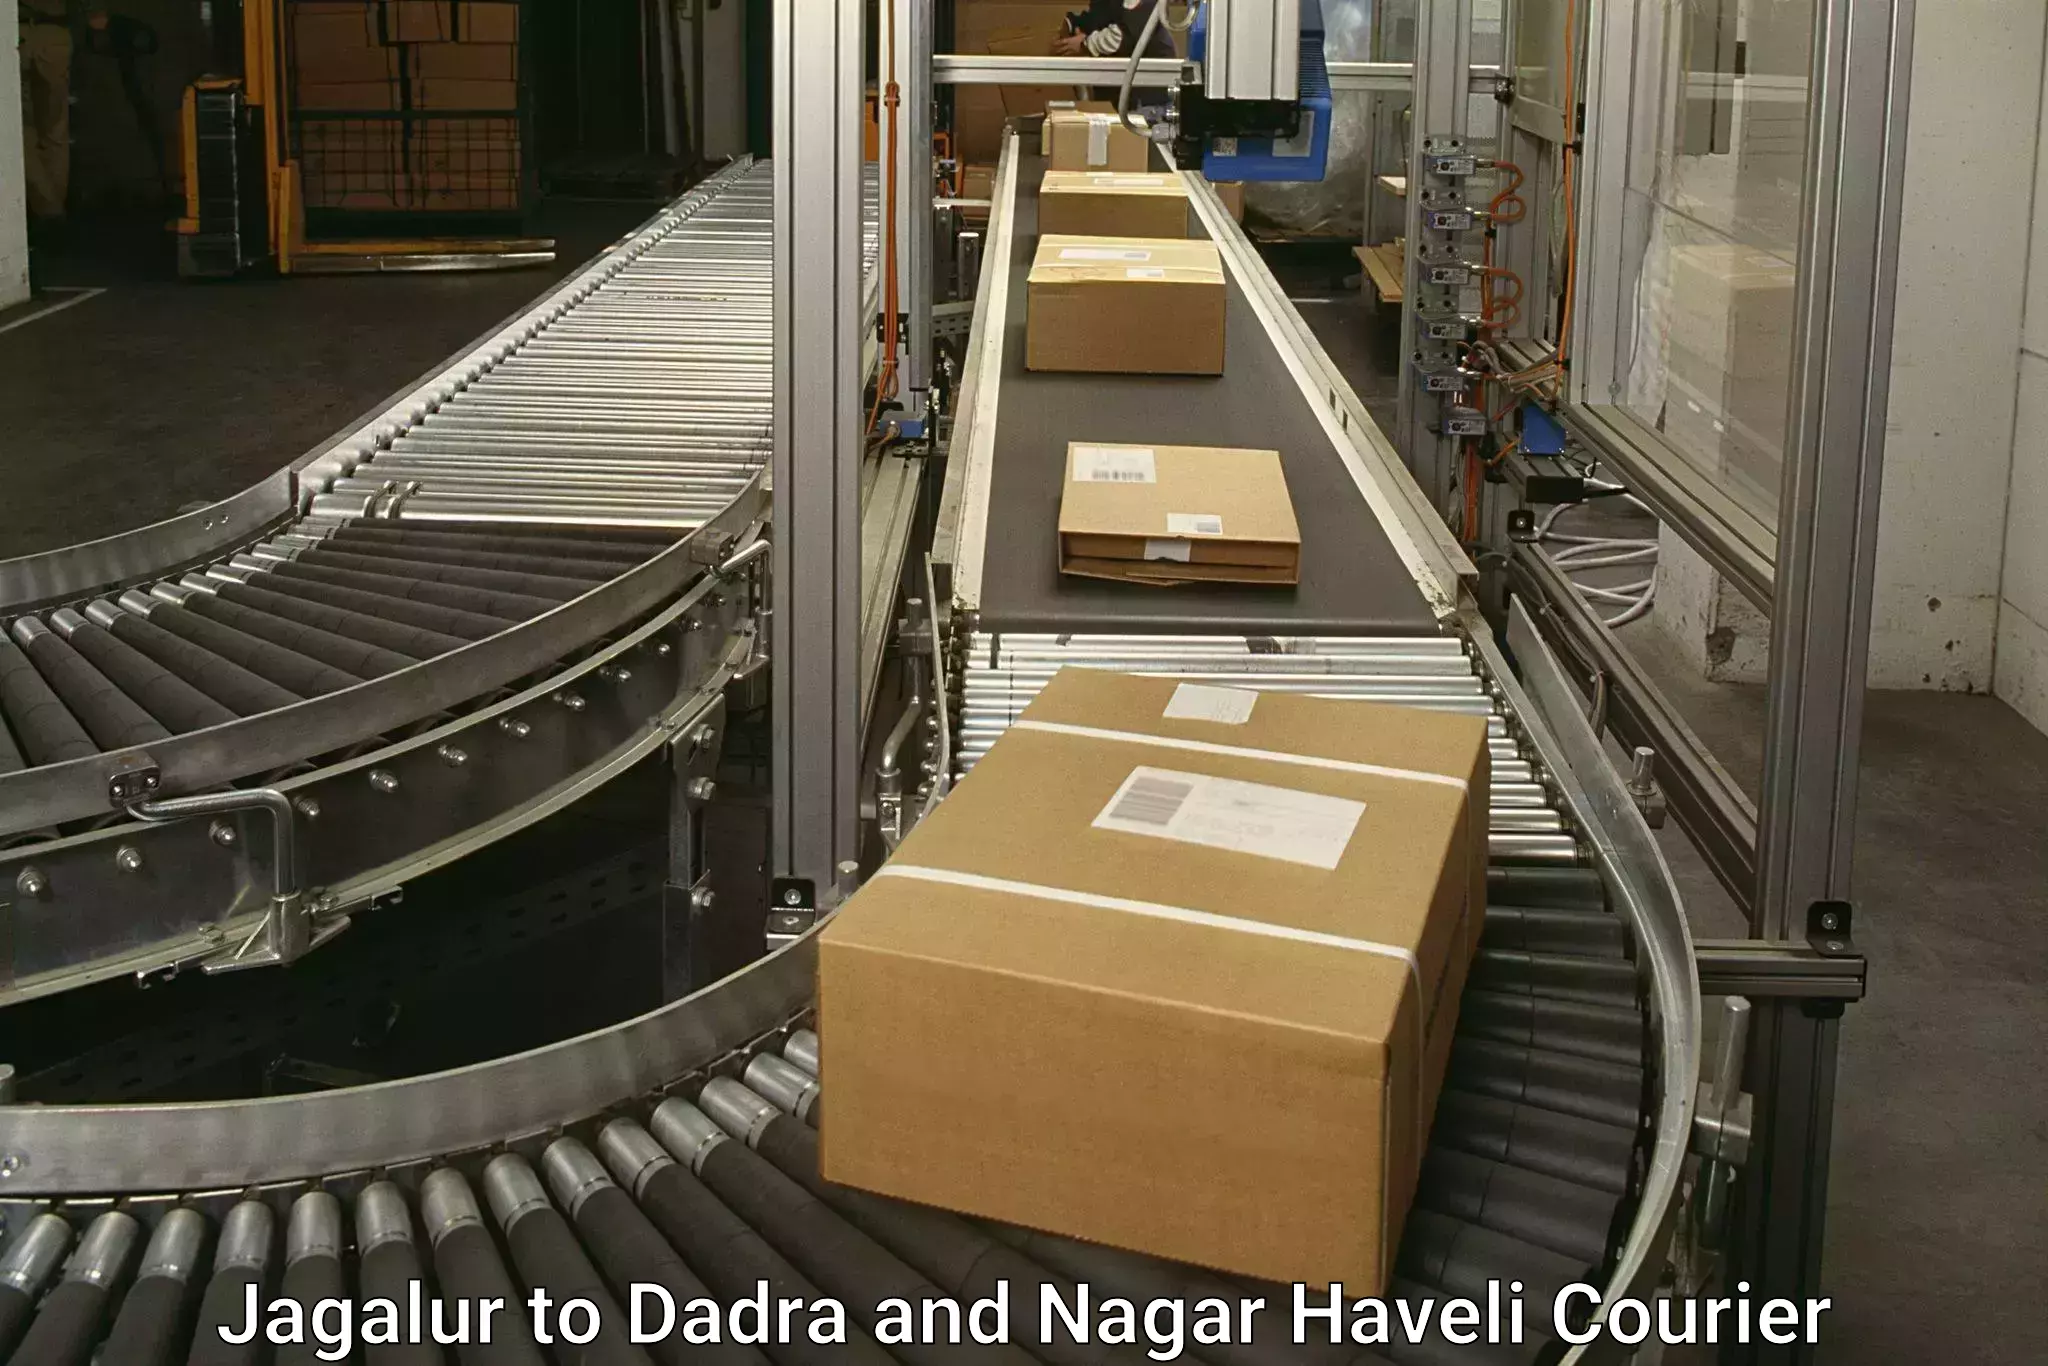 User-friendly delivery service Jagalur to Dadra and Nagar Haveli